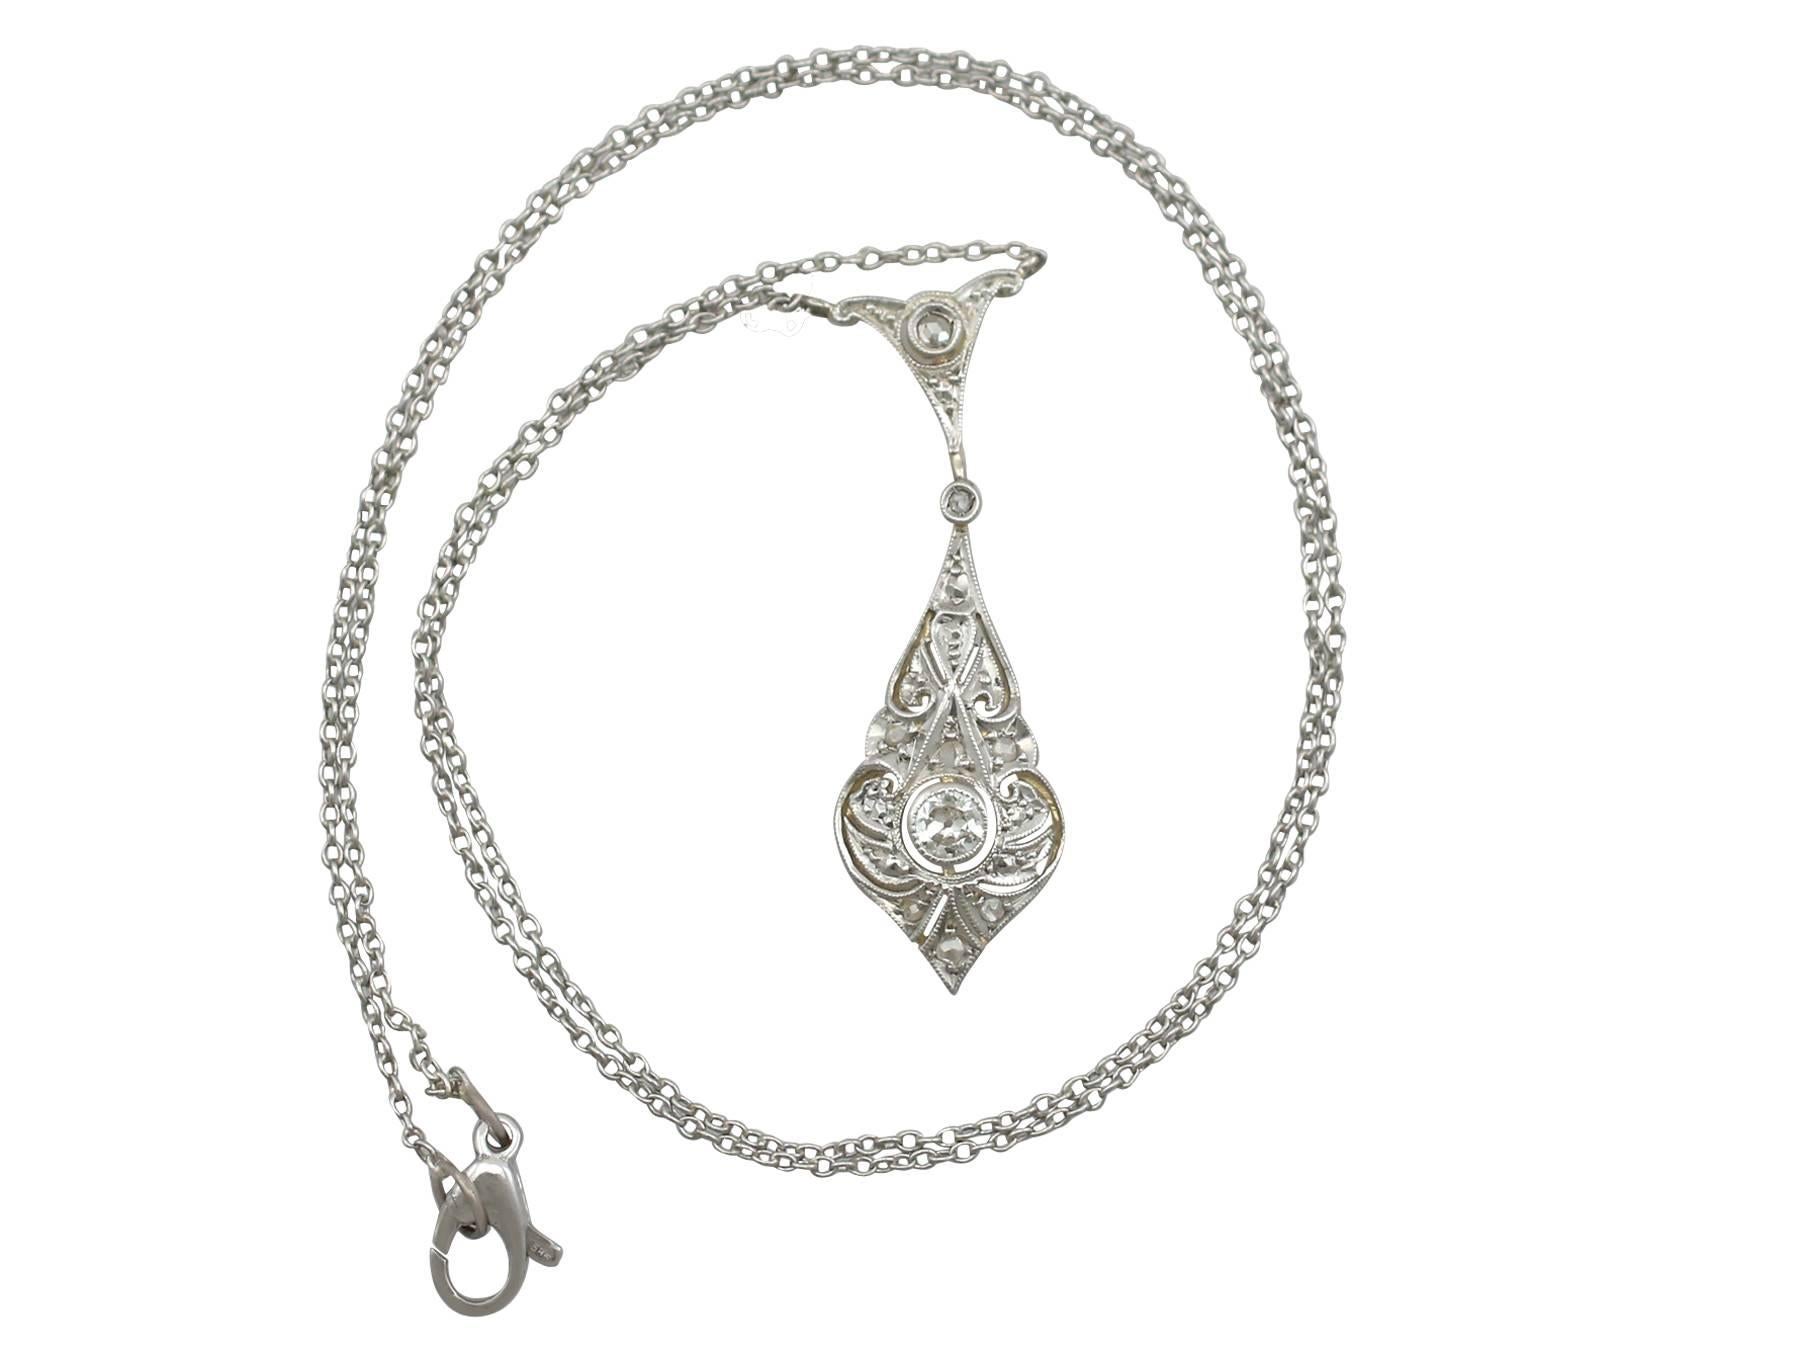 An impressive antique Art Deco 0.28 carat diamond and 18 karat yellow gold, 18 karat white gold set necklace; part of our diverse antique jewelry collections

This fine and impressive Art Deco necklace has been crafted in 18 k yellow gold with an 18